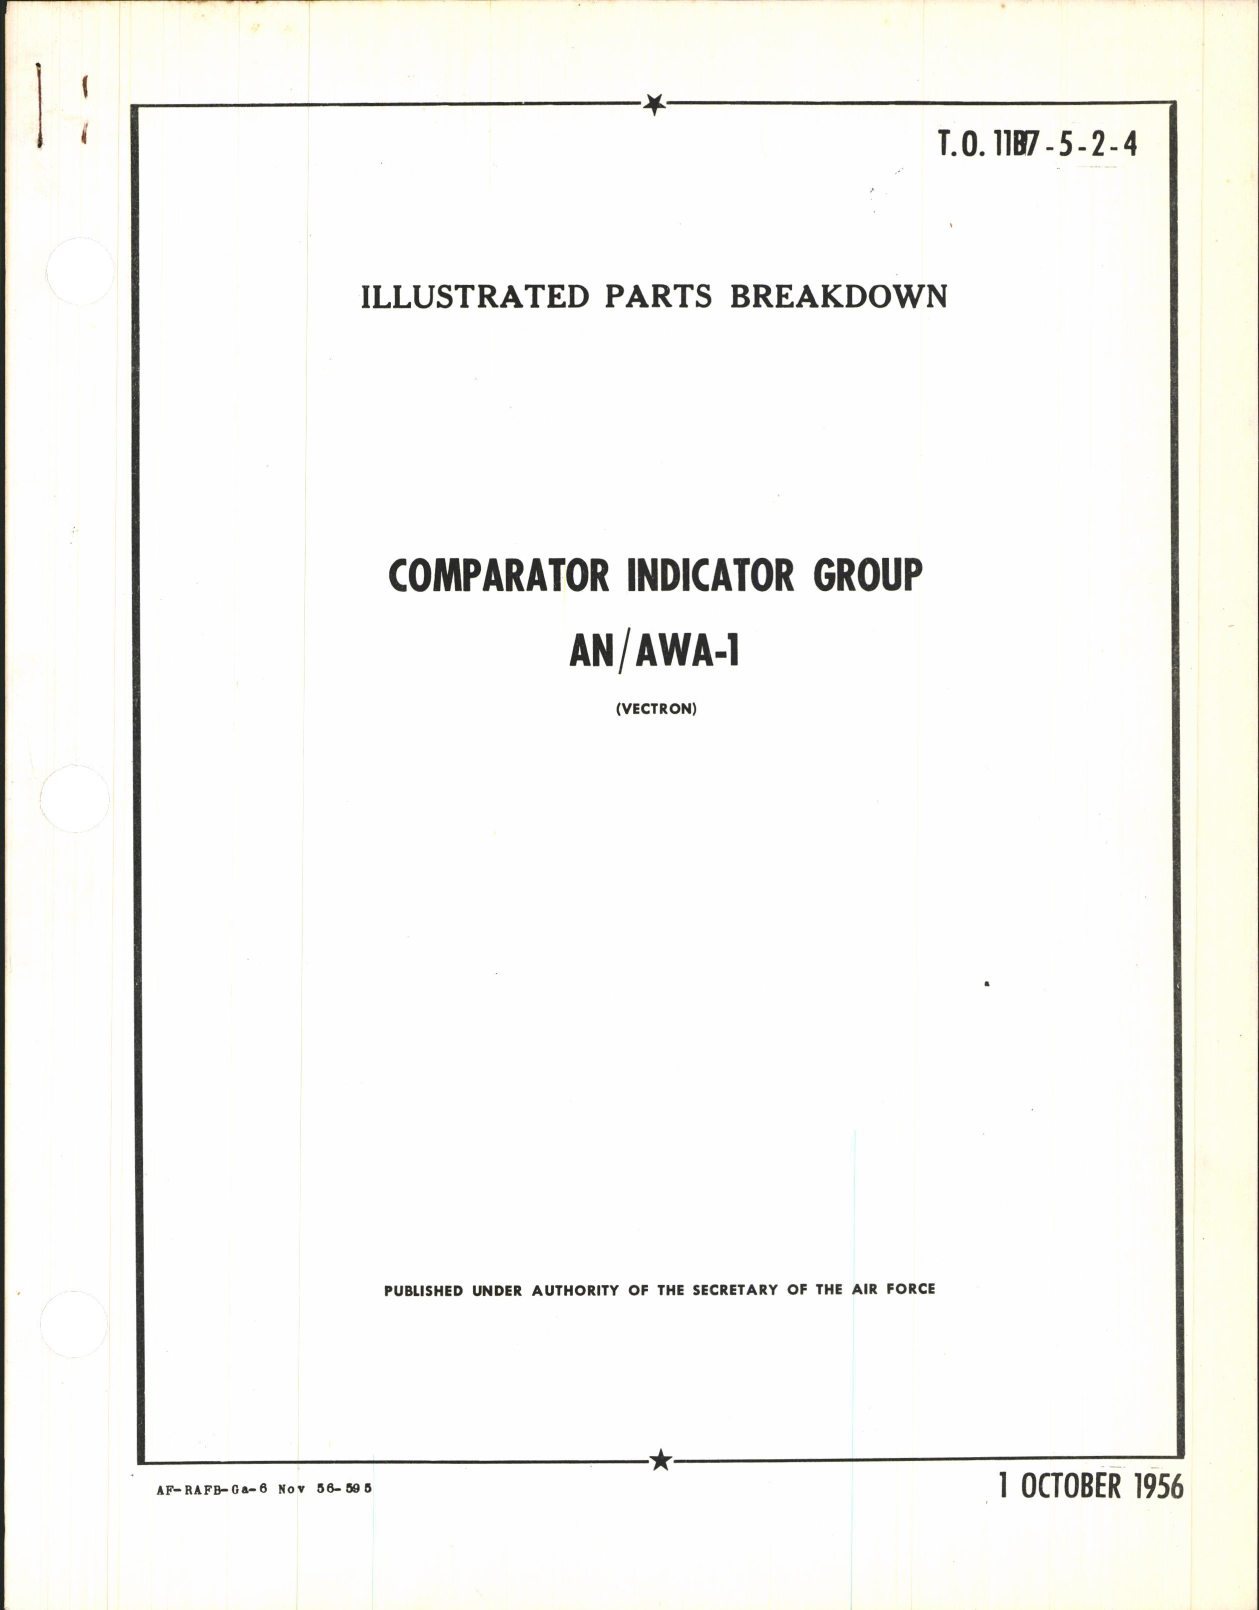 Sample page 1 from AirCorps Library document: Illustrated Parts Breakdown for Comparator Indicator Group AN/AWA-1